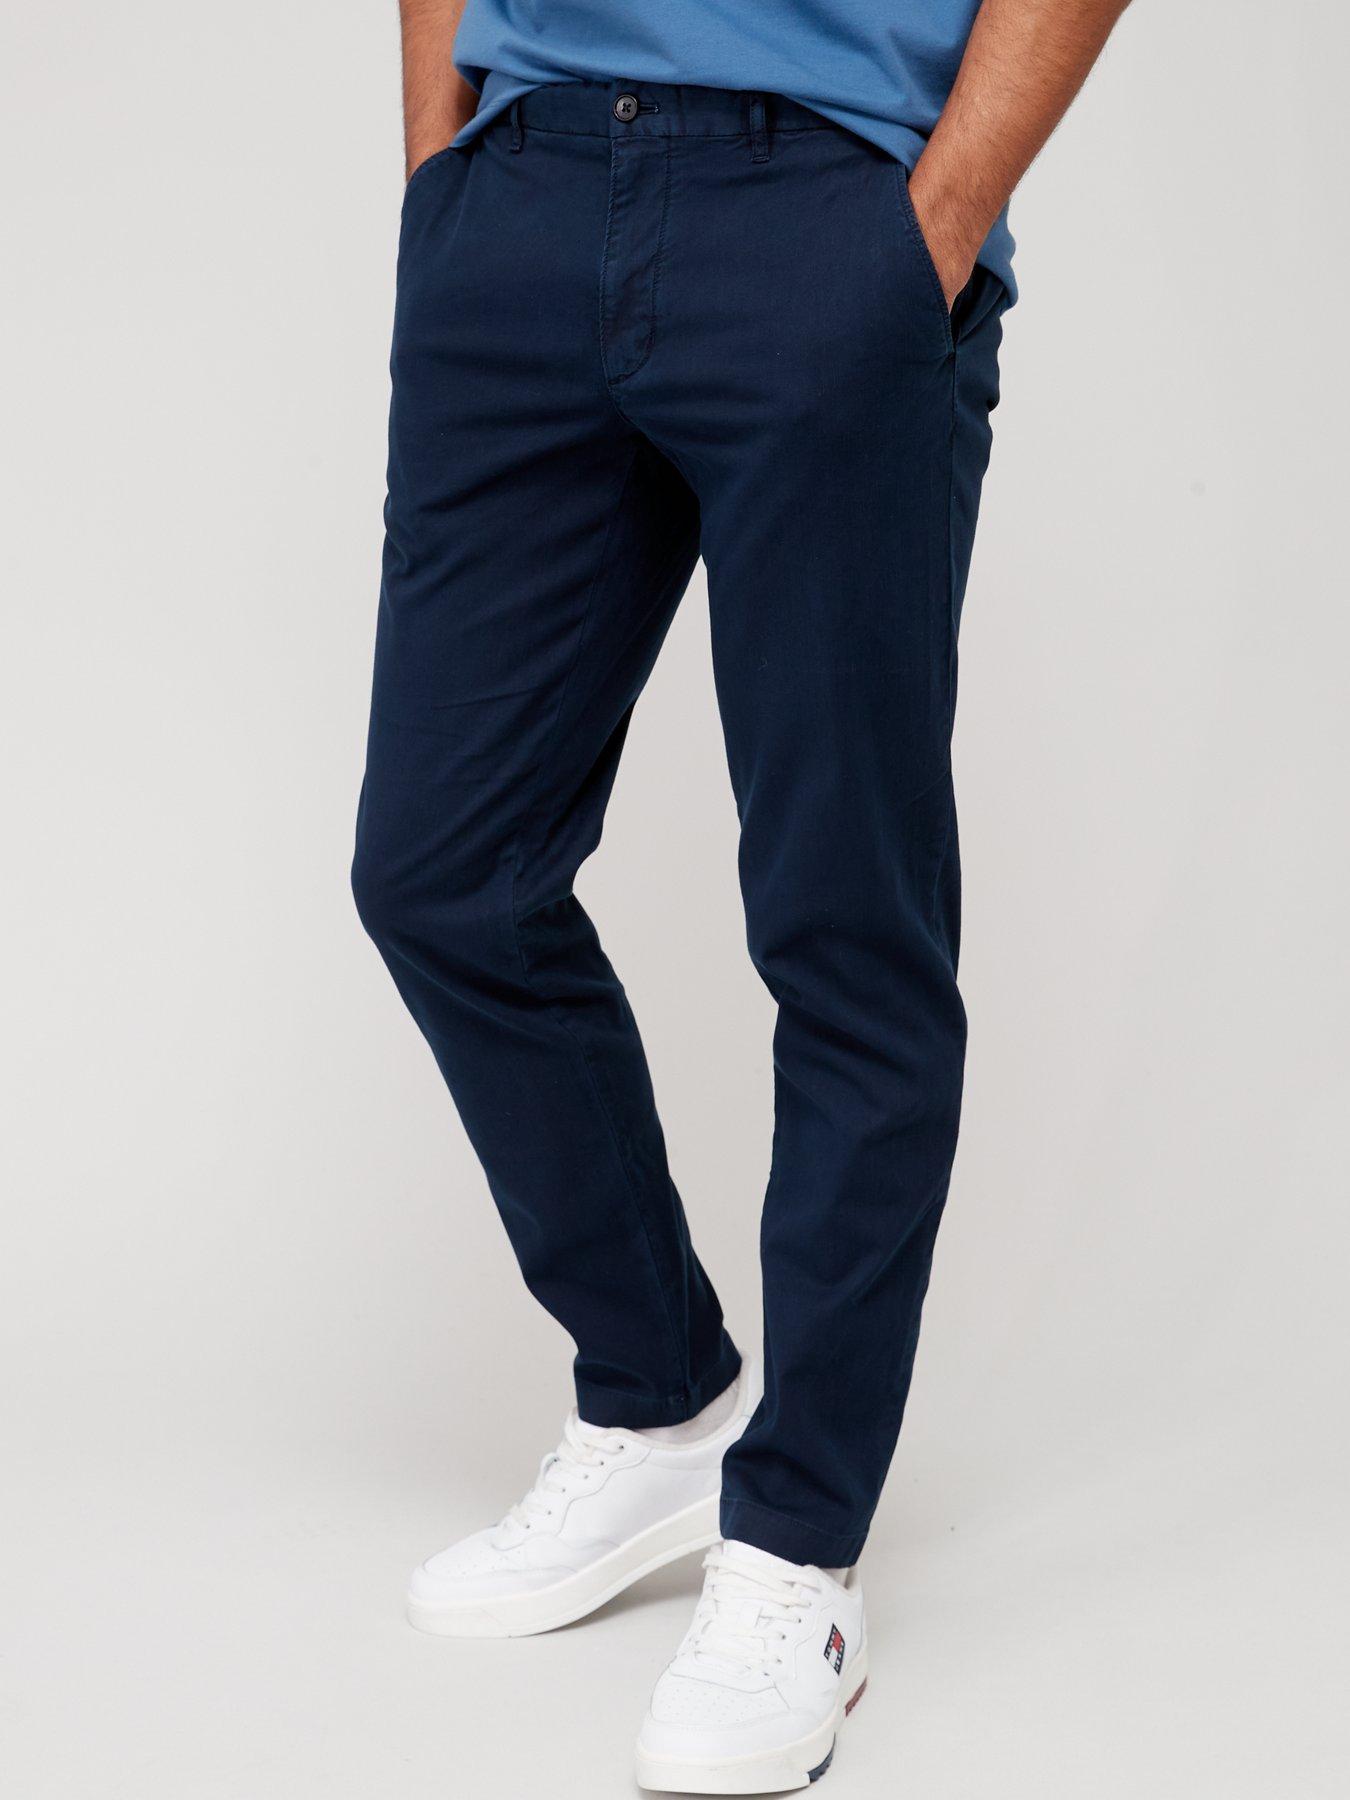 Udlevering Teknologi Whirlpool Tommy hilfiger | Trousers & chinos | Men | Very Ireland